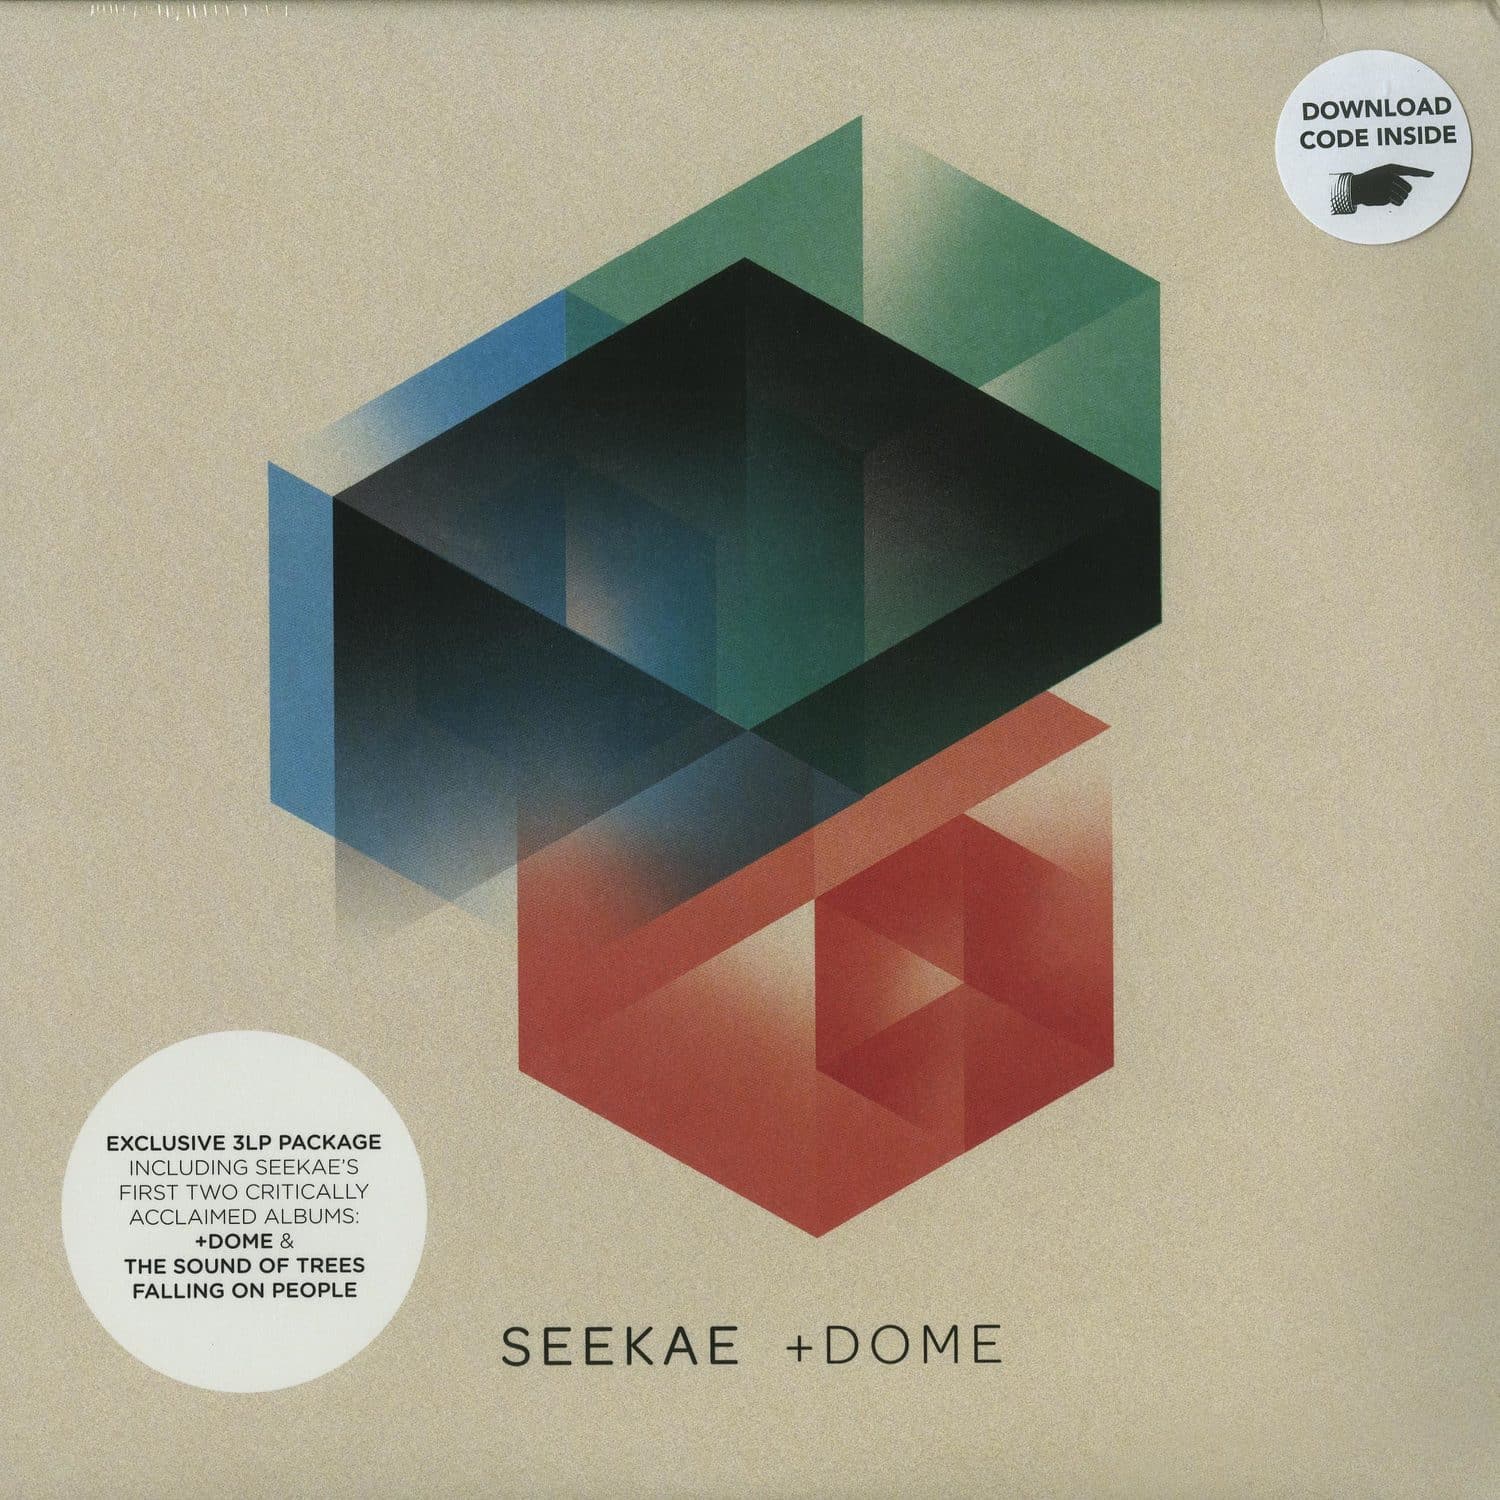 Seekae - THE SOUND OF TREES FALLING ON PEOPLE / +DOME 